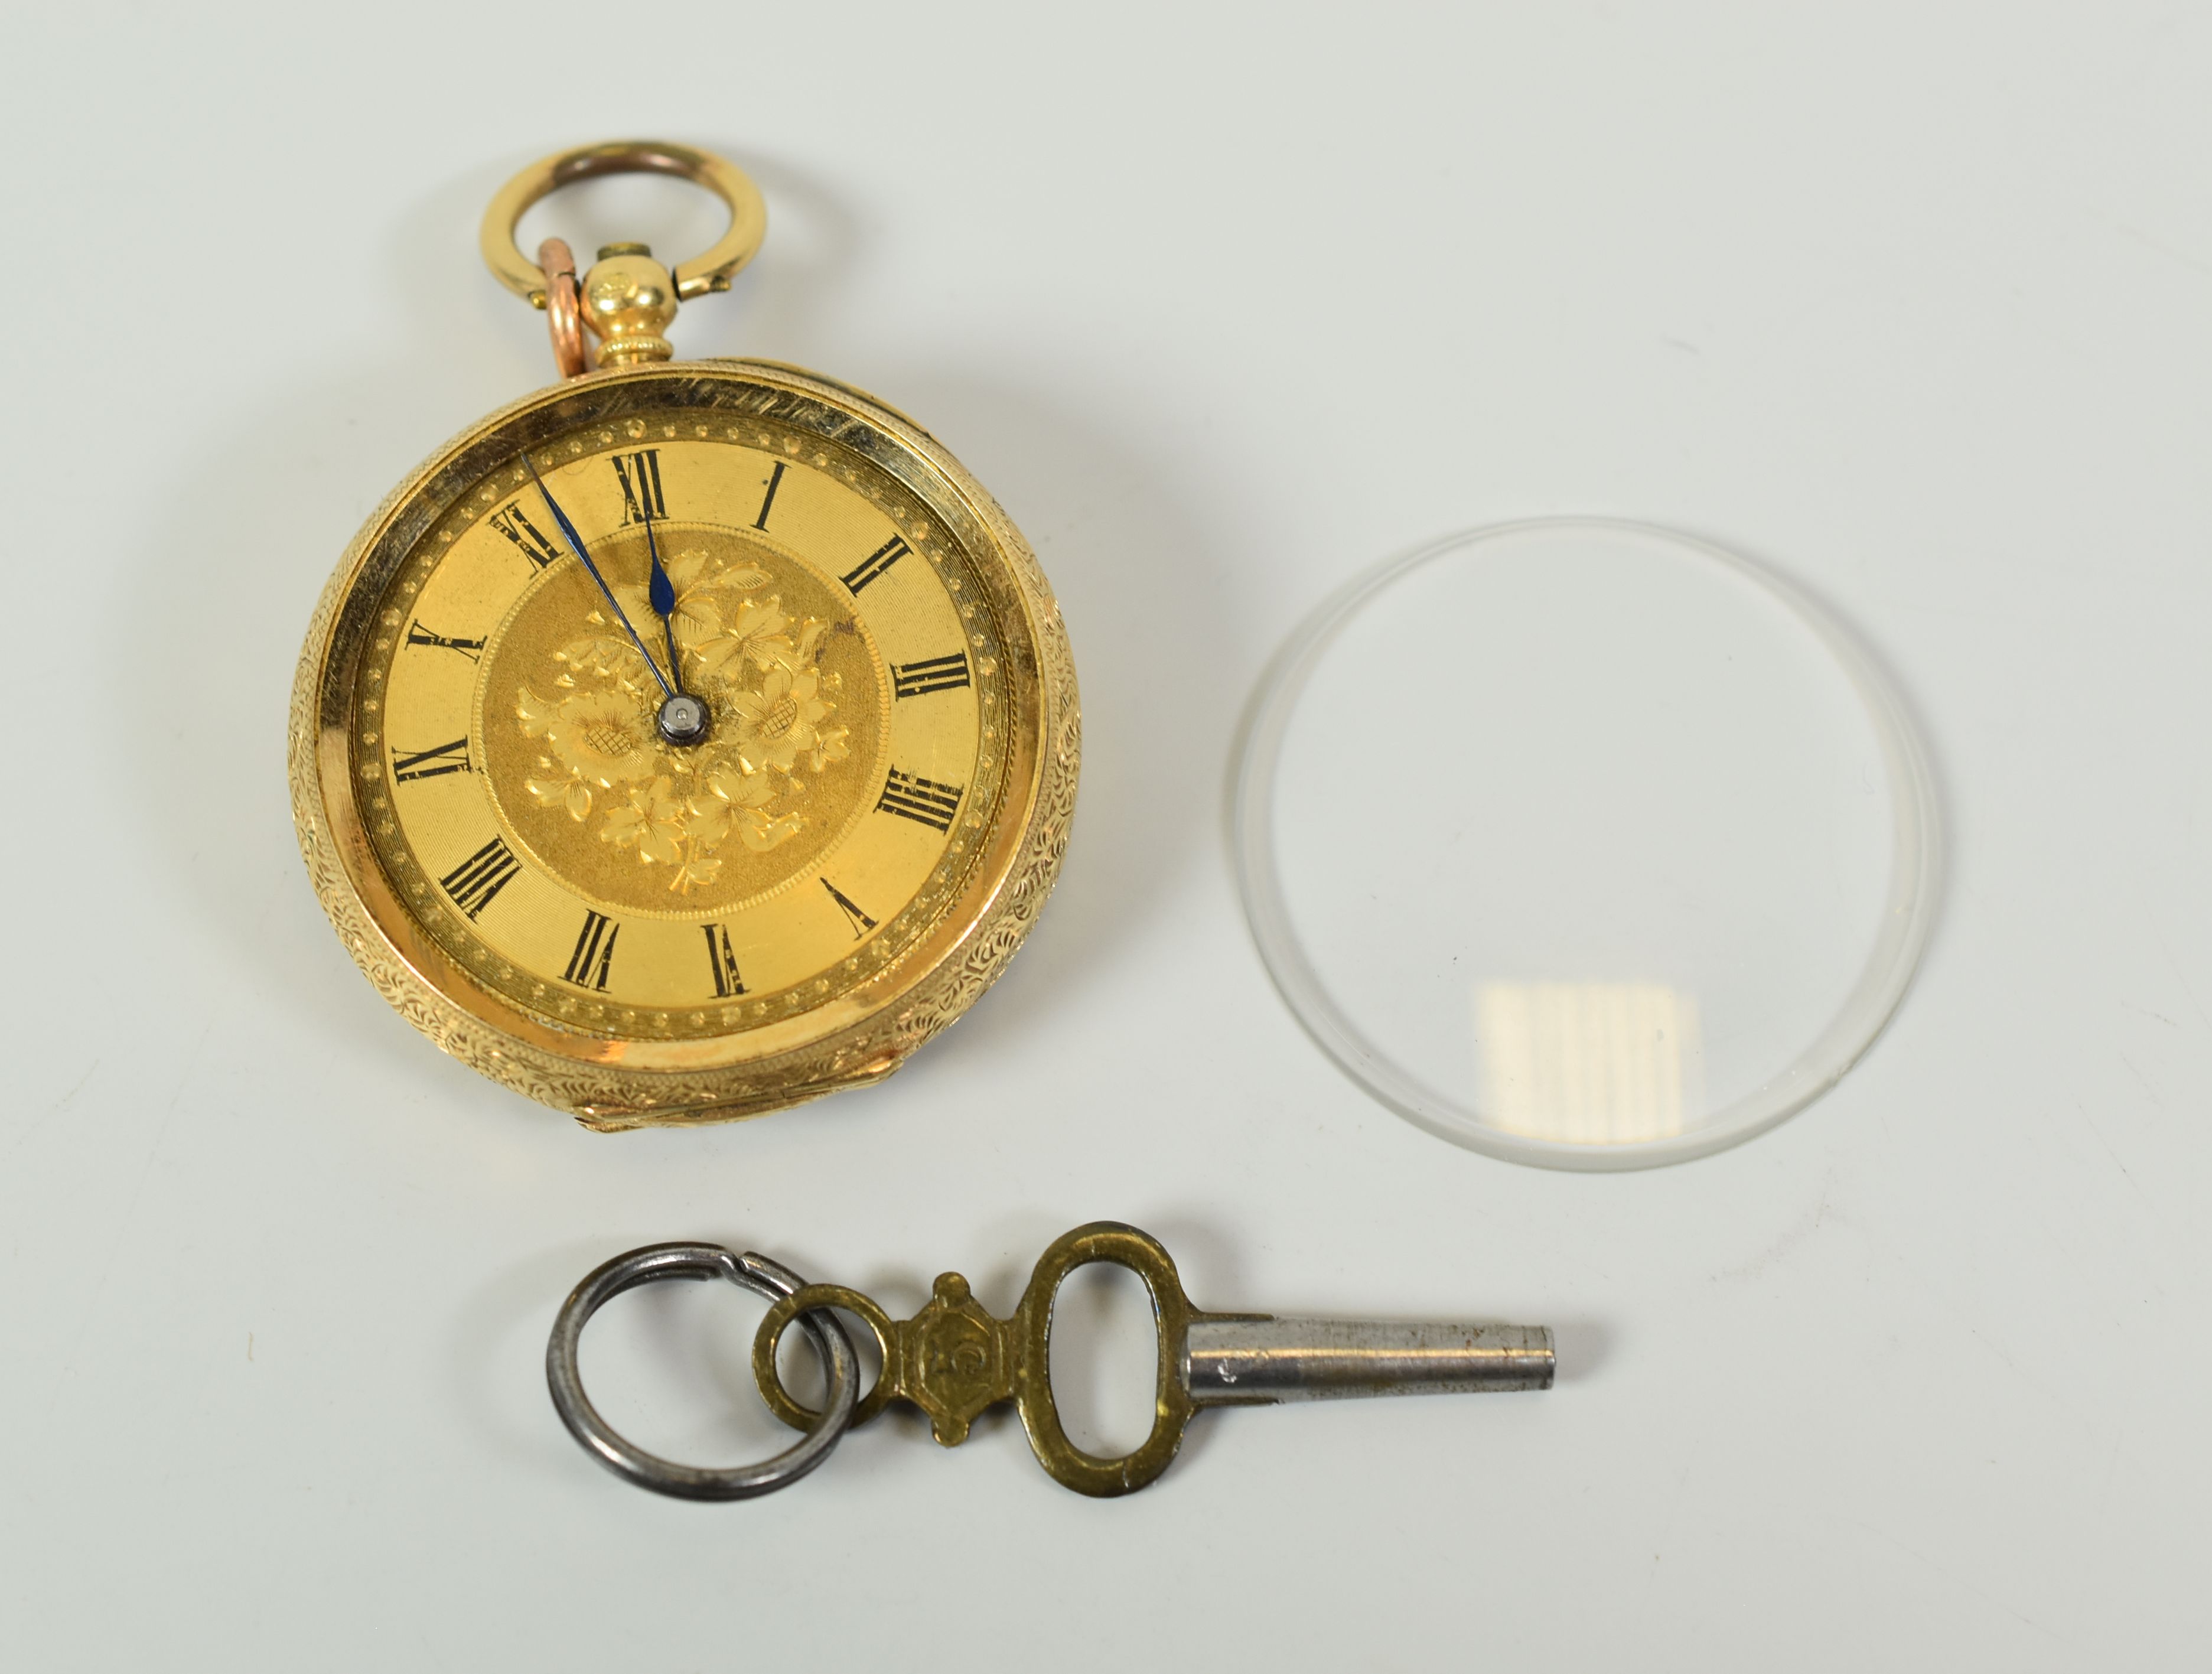 AN 18K GOLD OPEN FACE POCKET WATCH with key for winding and box, fully engraved case and Roman